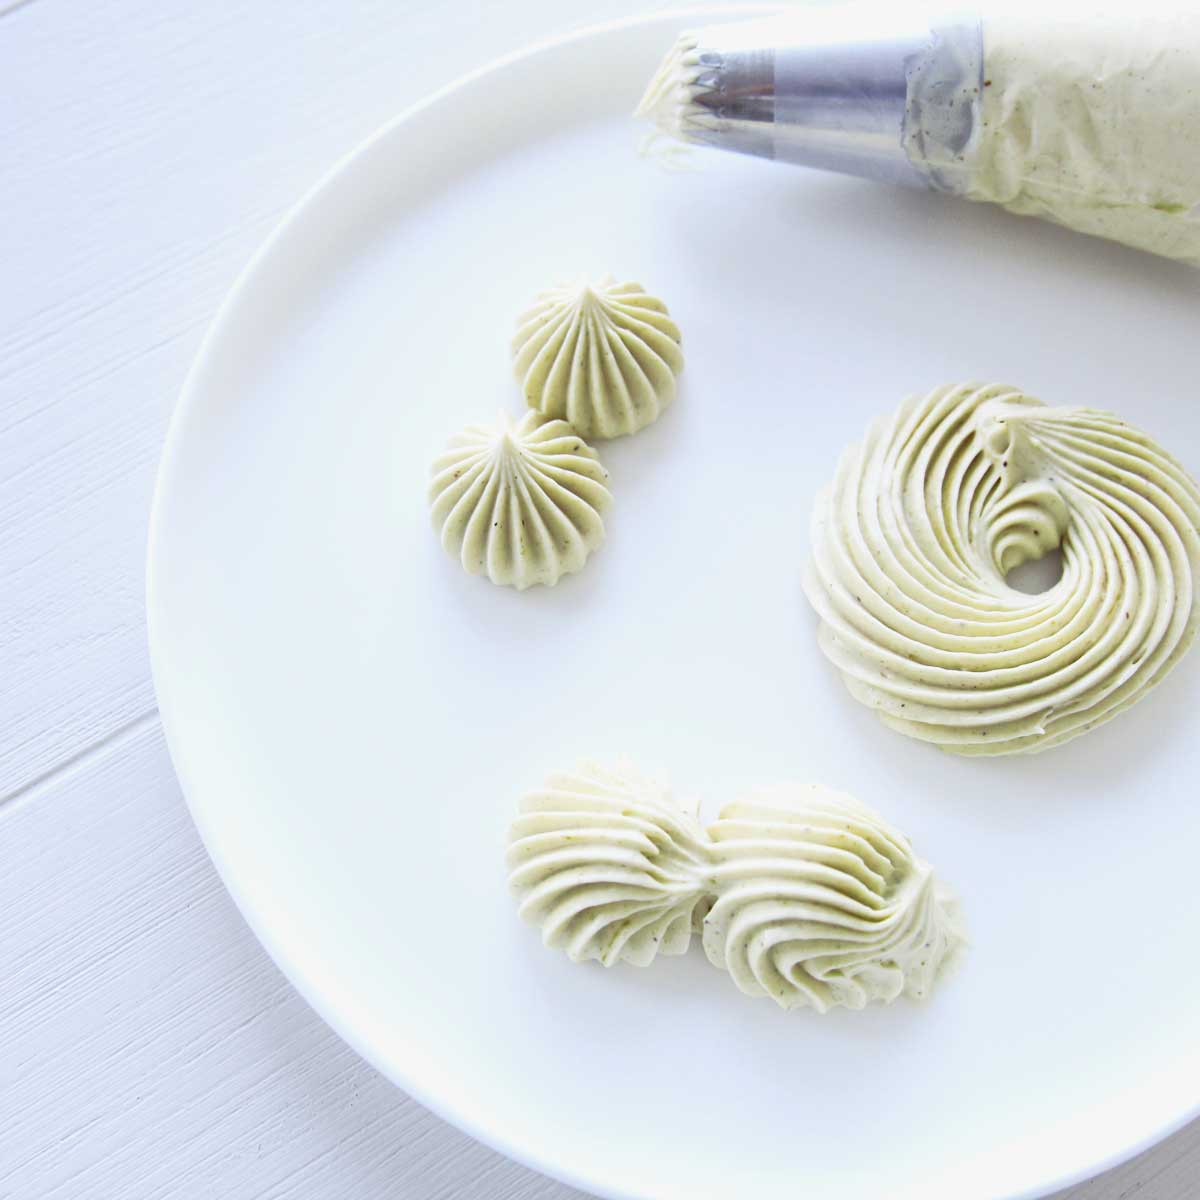 piped whipped cream - Low Carb Pistachio Whipped Cream (Stabilized with Cream Cheese)